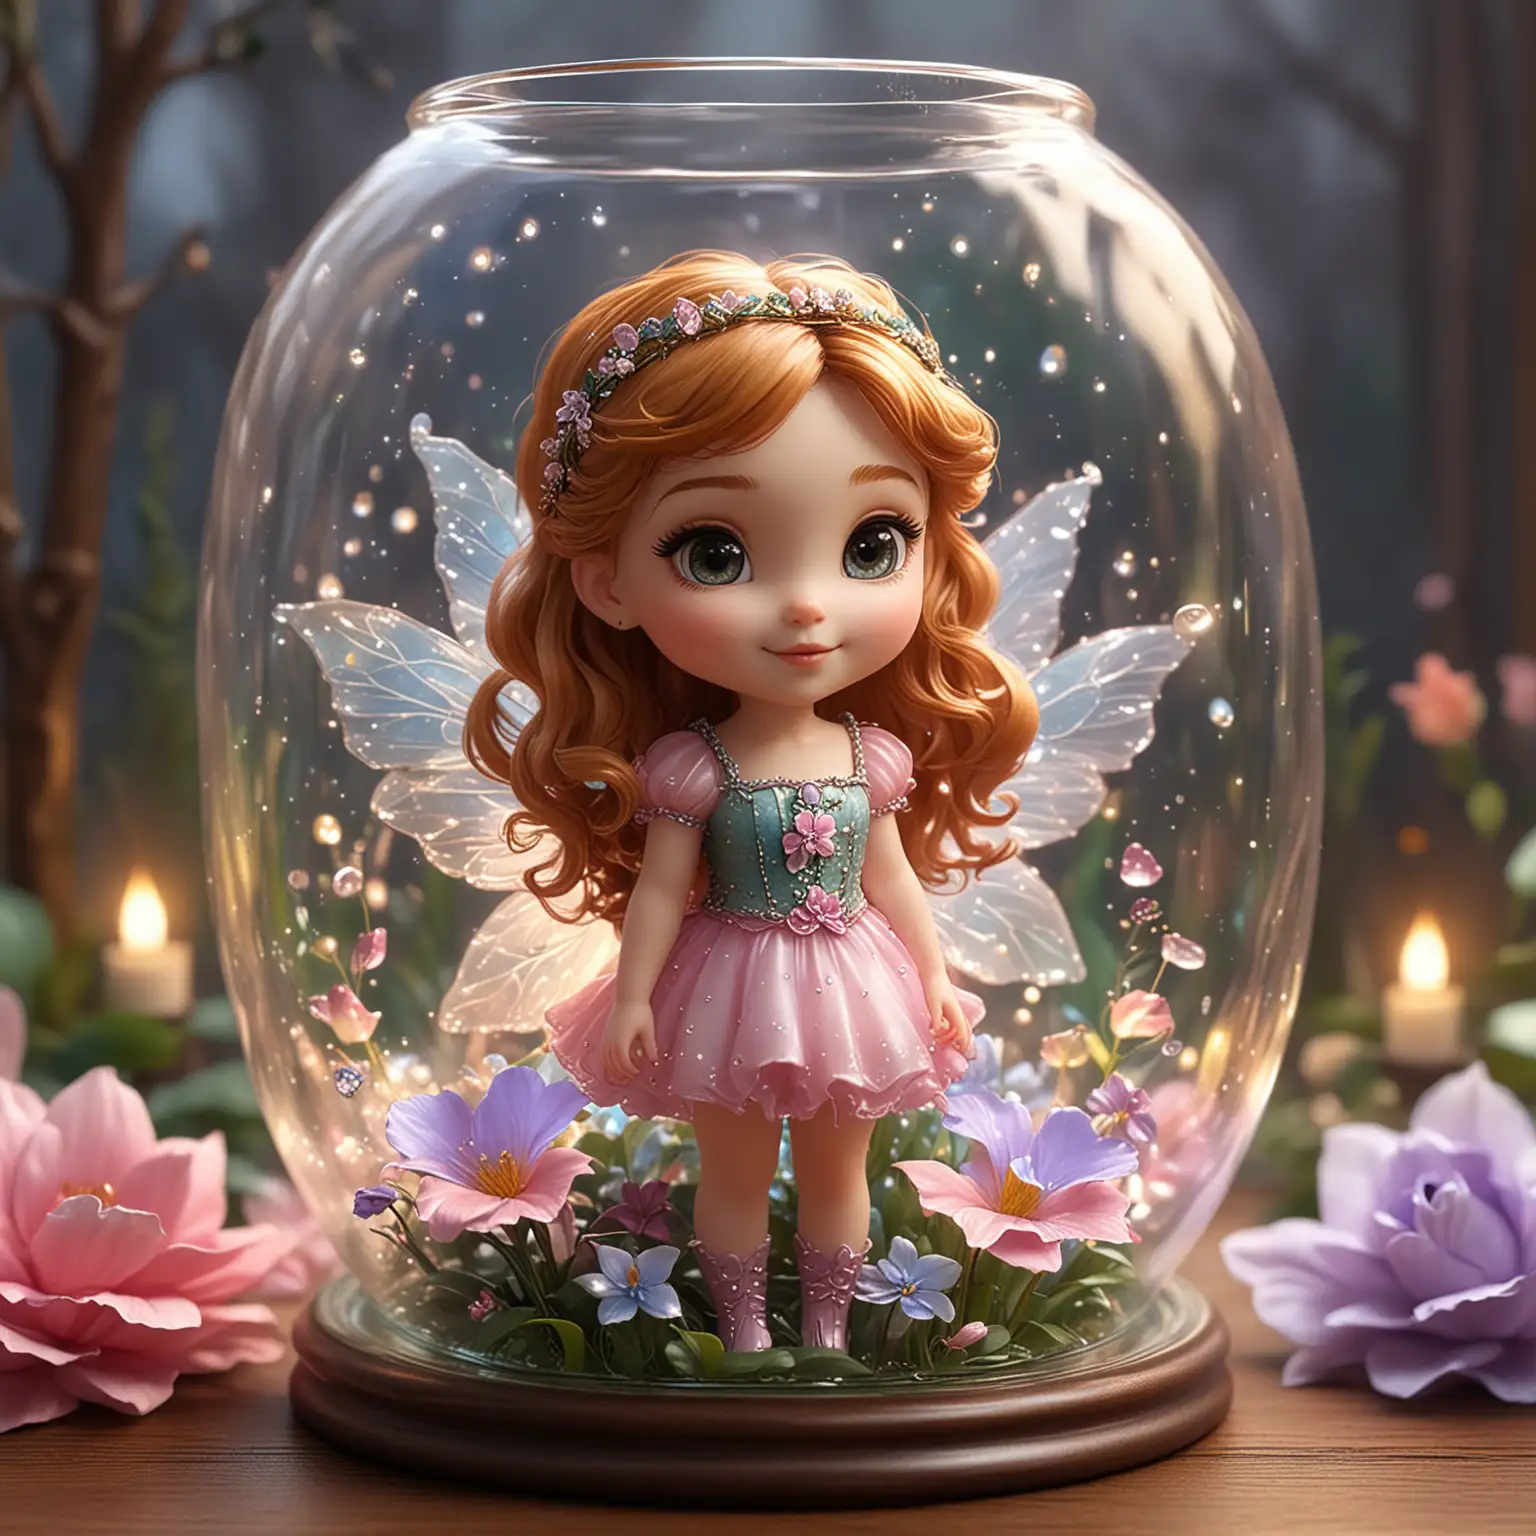 Create an enchanting fairy, chibi, things in glass, and girly portrait. High Quality ñ, HD, Thomas Kinkade Style.